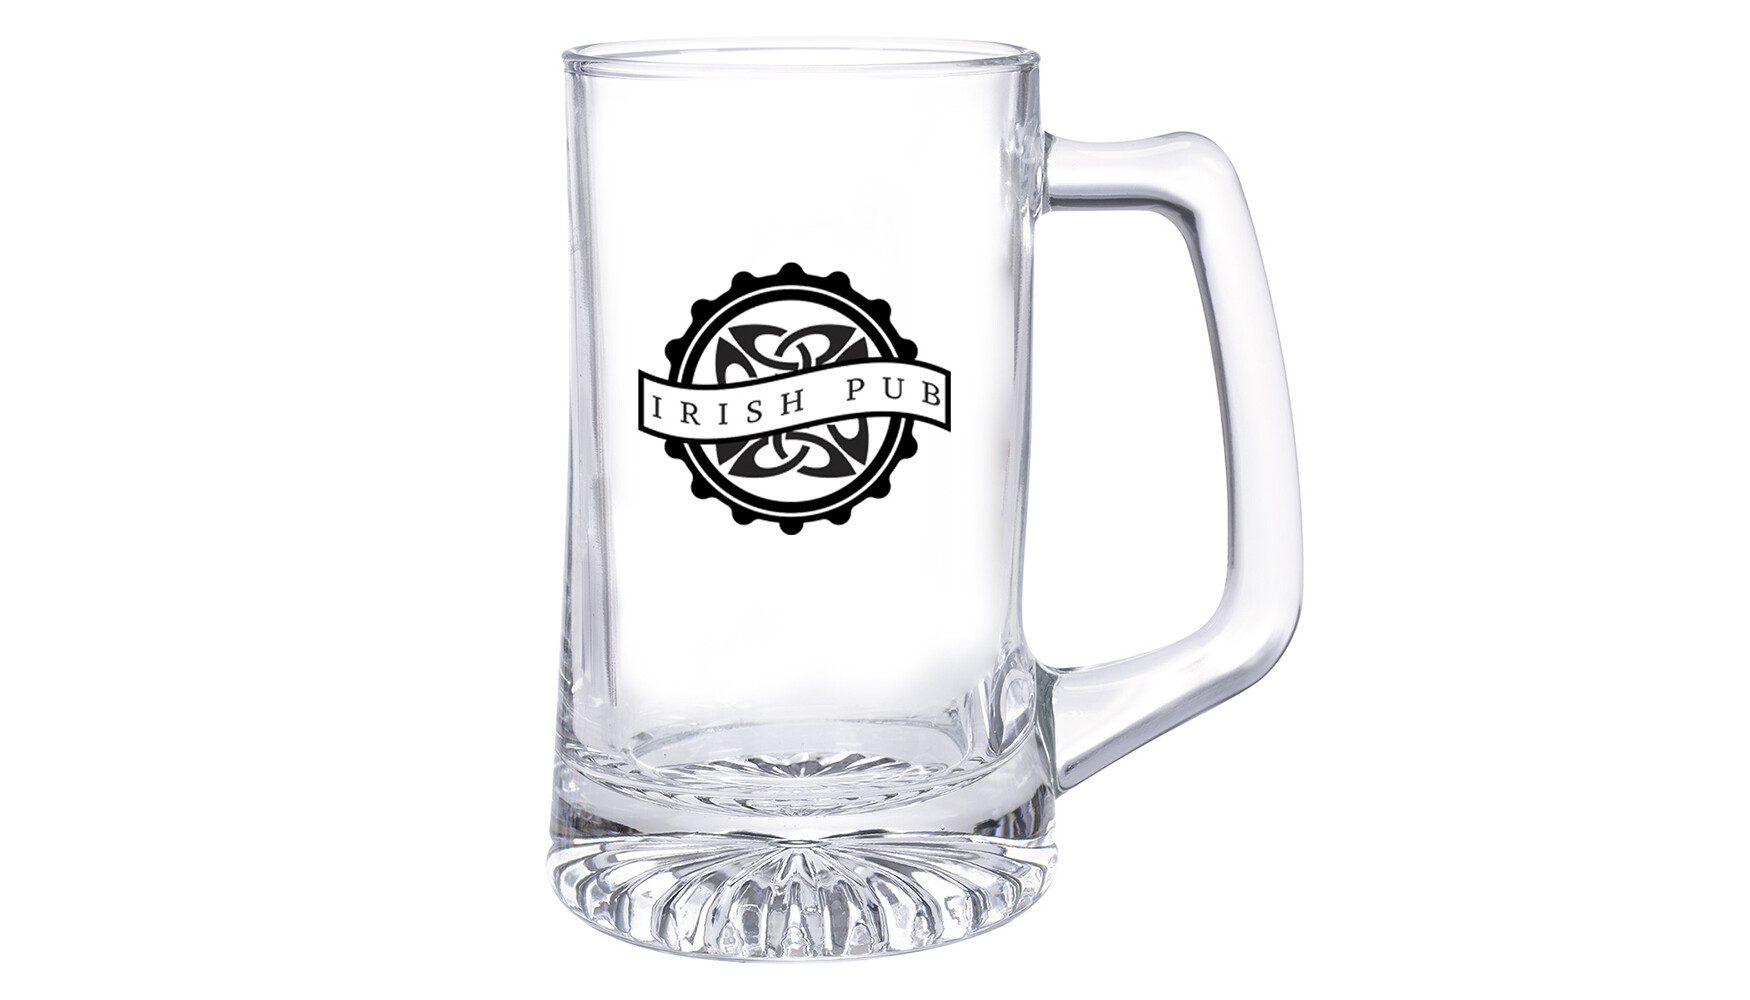 Imprinted Promotional Beer Glass